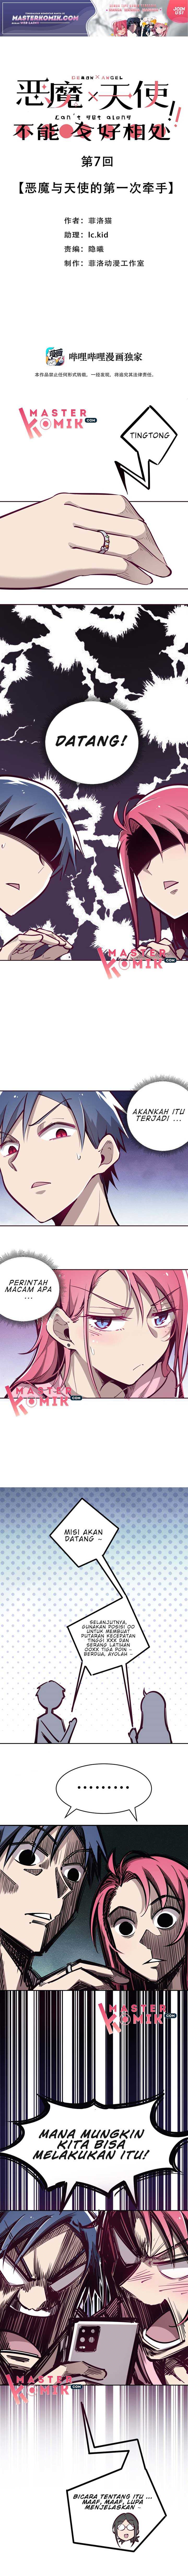 Demon X Angel, Can’t Get Along! Chapter 07